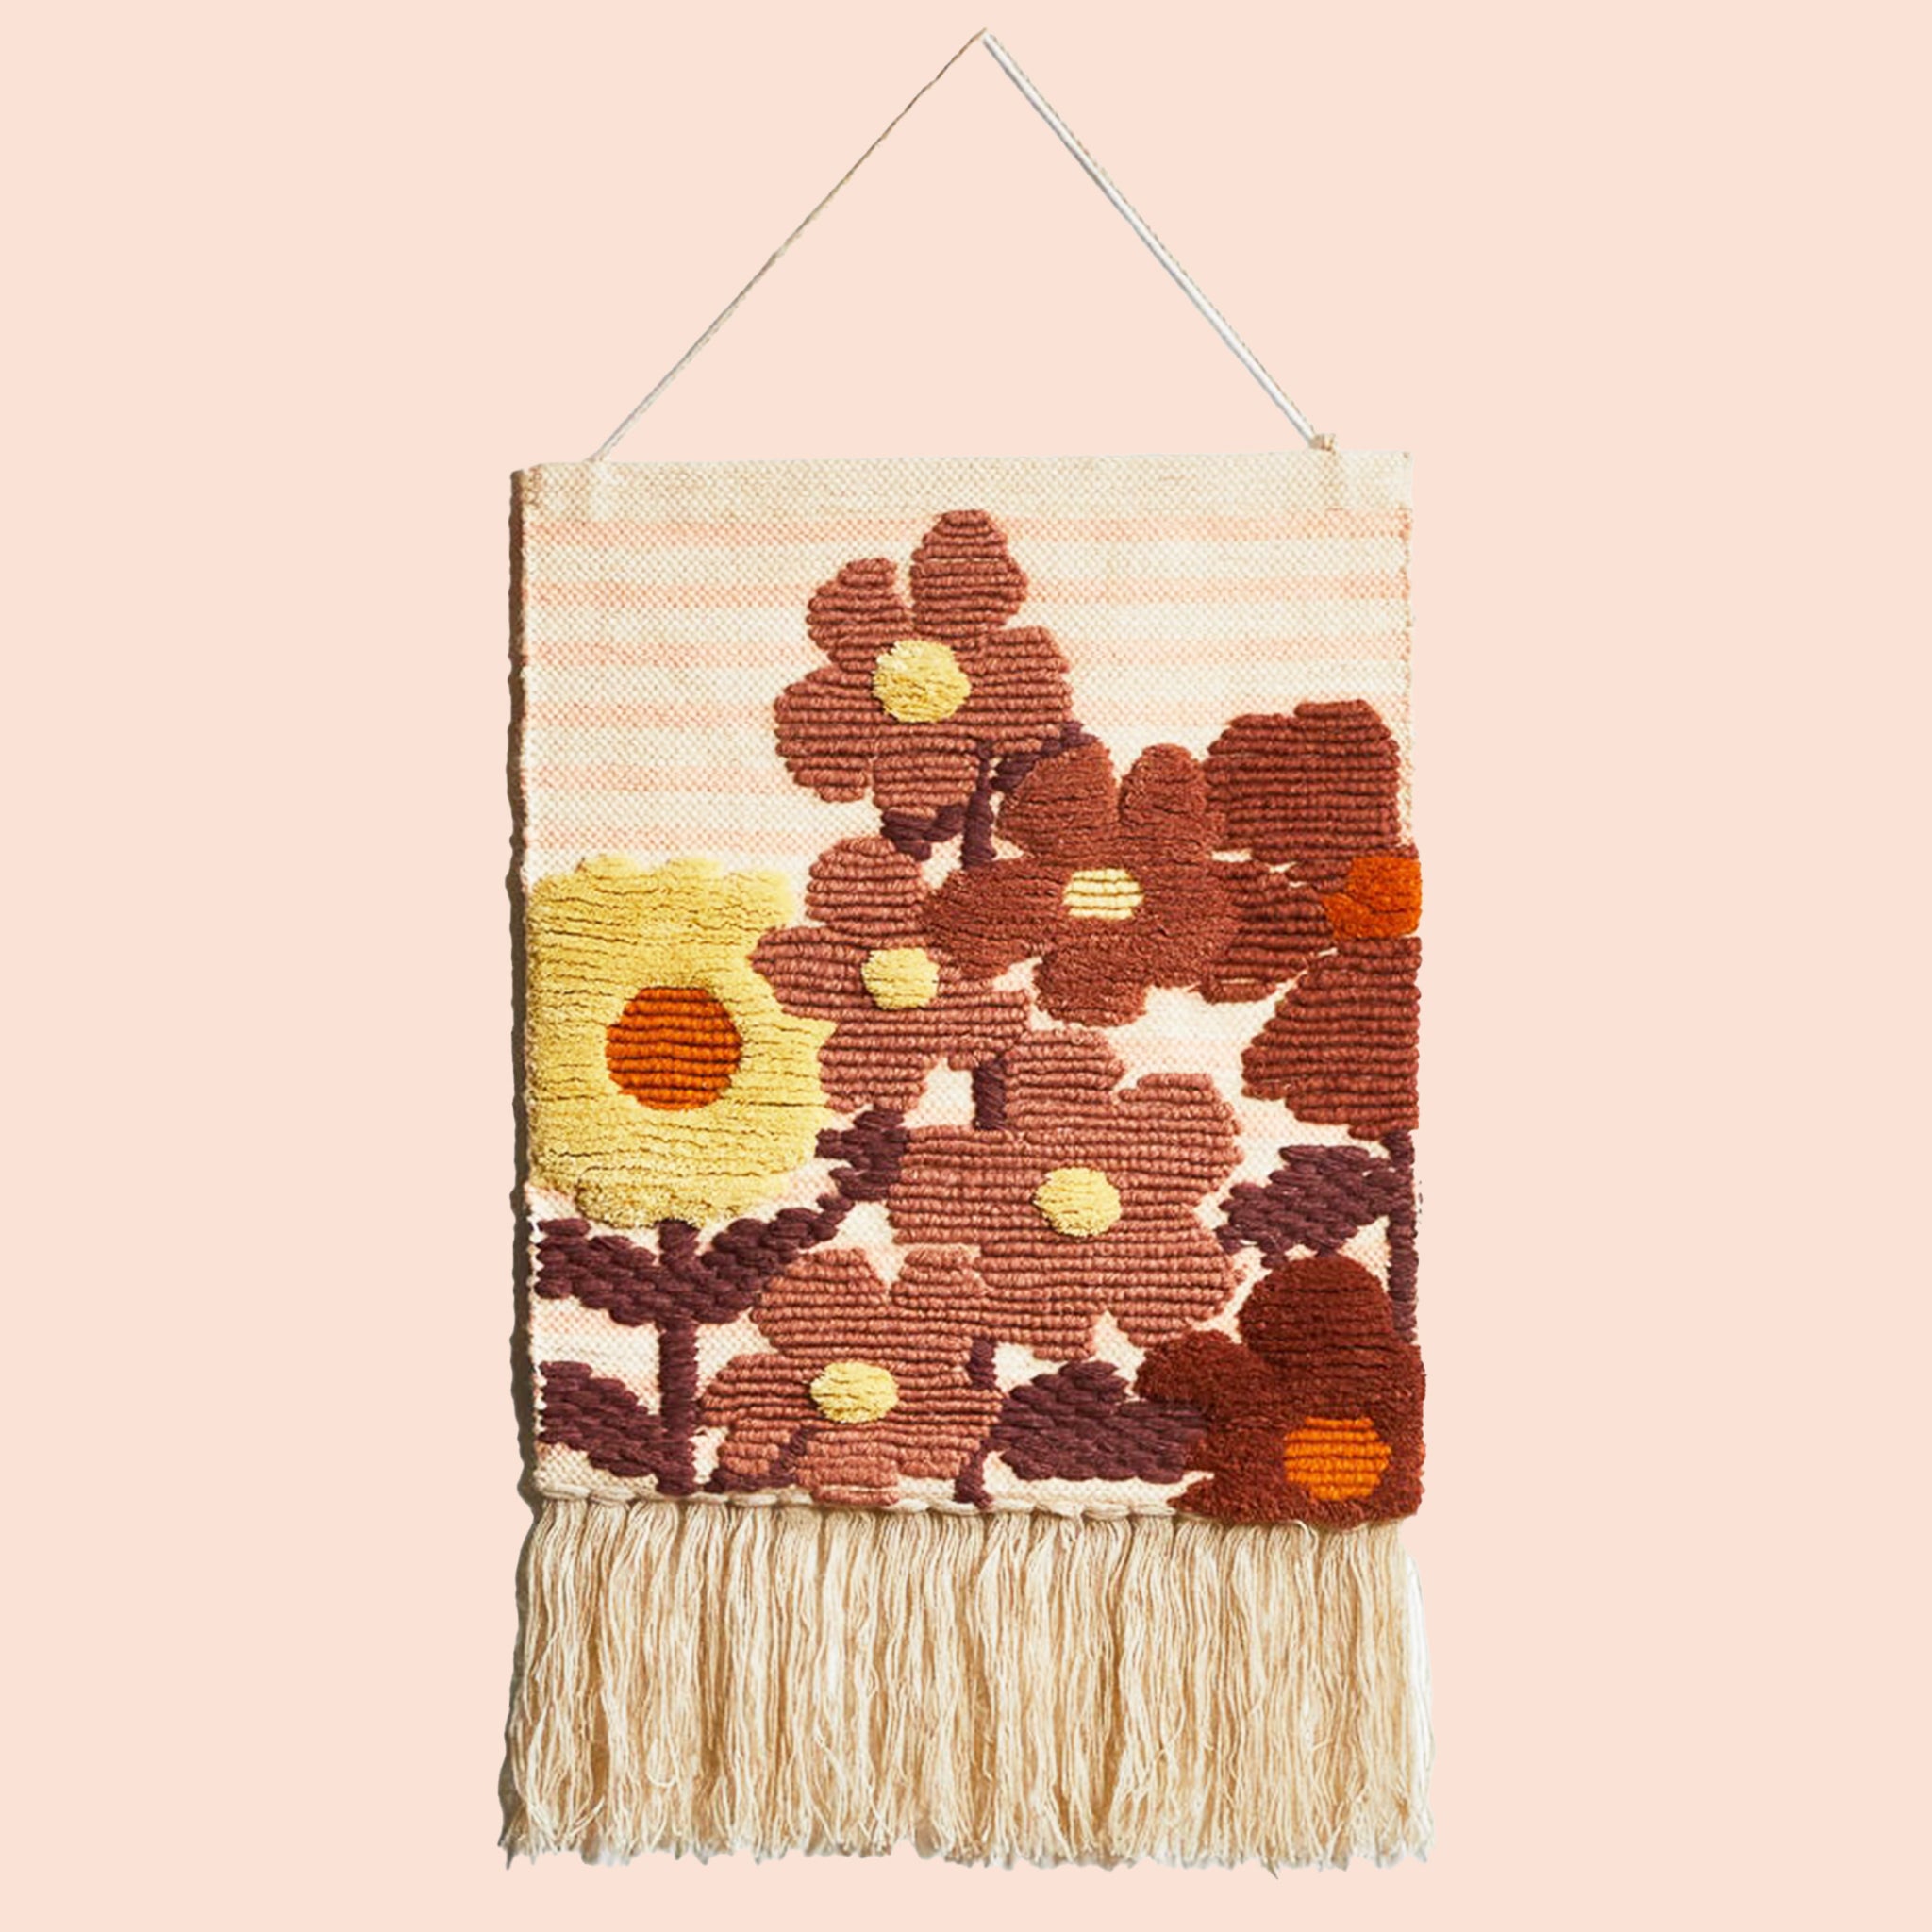 A hanging piece of woven wall art featuring rust and yellow colored floral prints and a fringe detail hanging from the bottom edge.